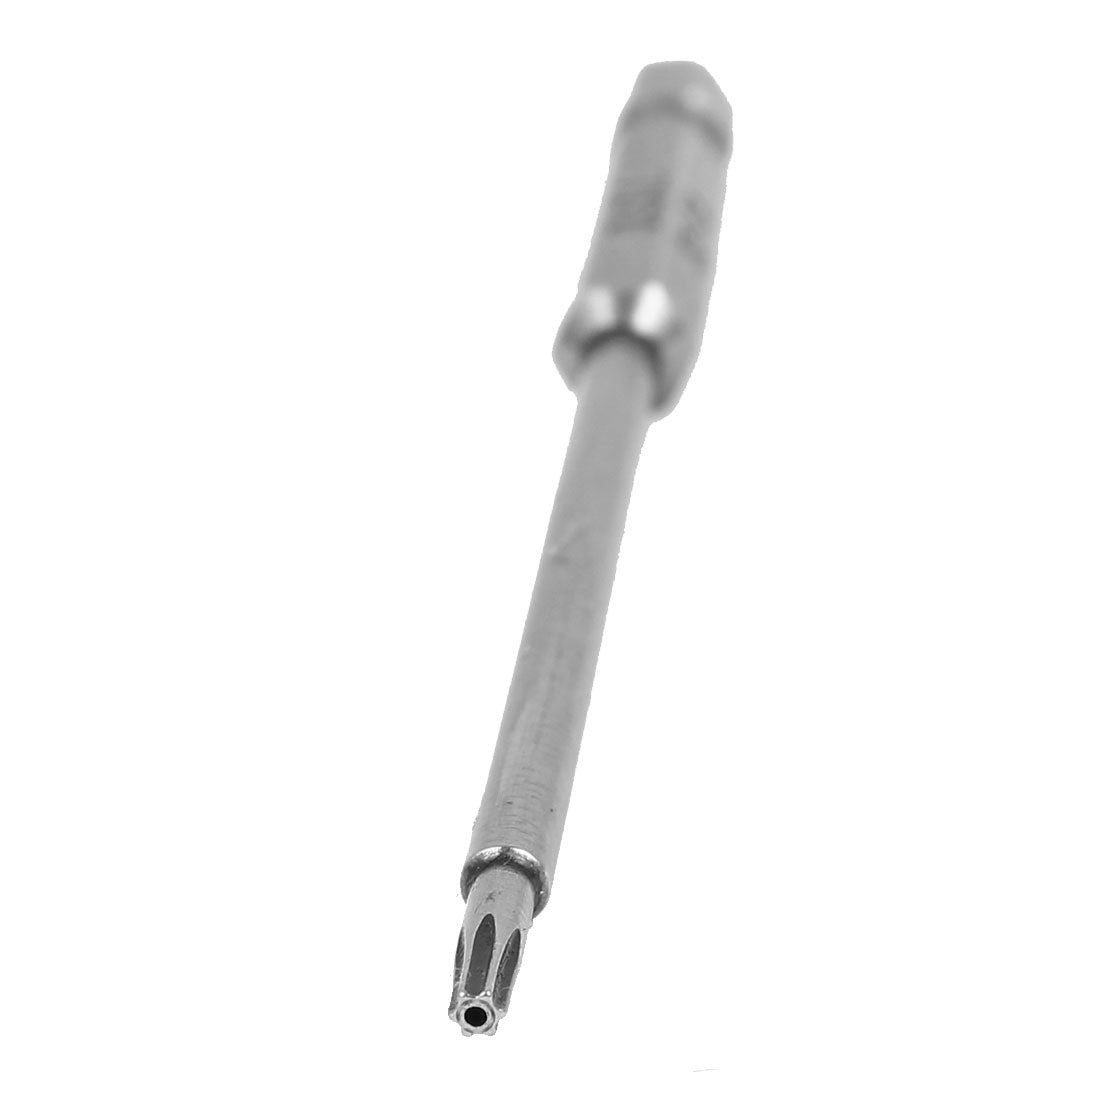 Uxcell Uxcell 100mm Length 1/4" Hex Shank T15 Magnetic Torx Security Screwdriver Bits